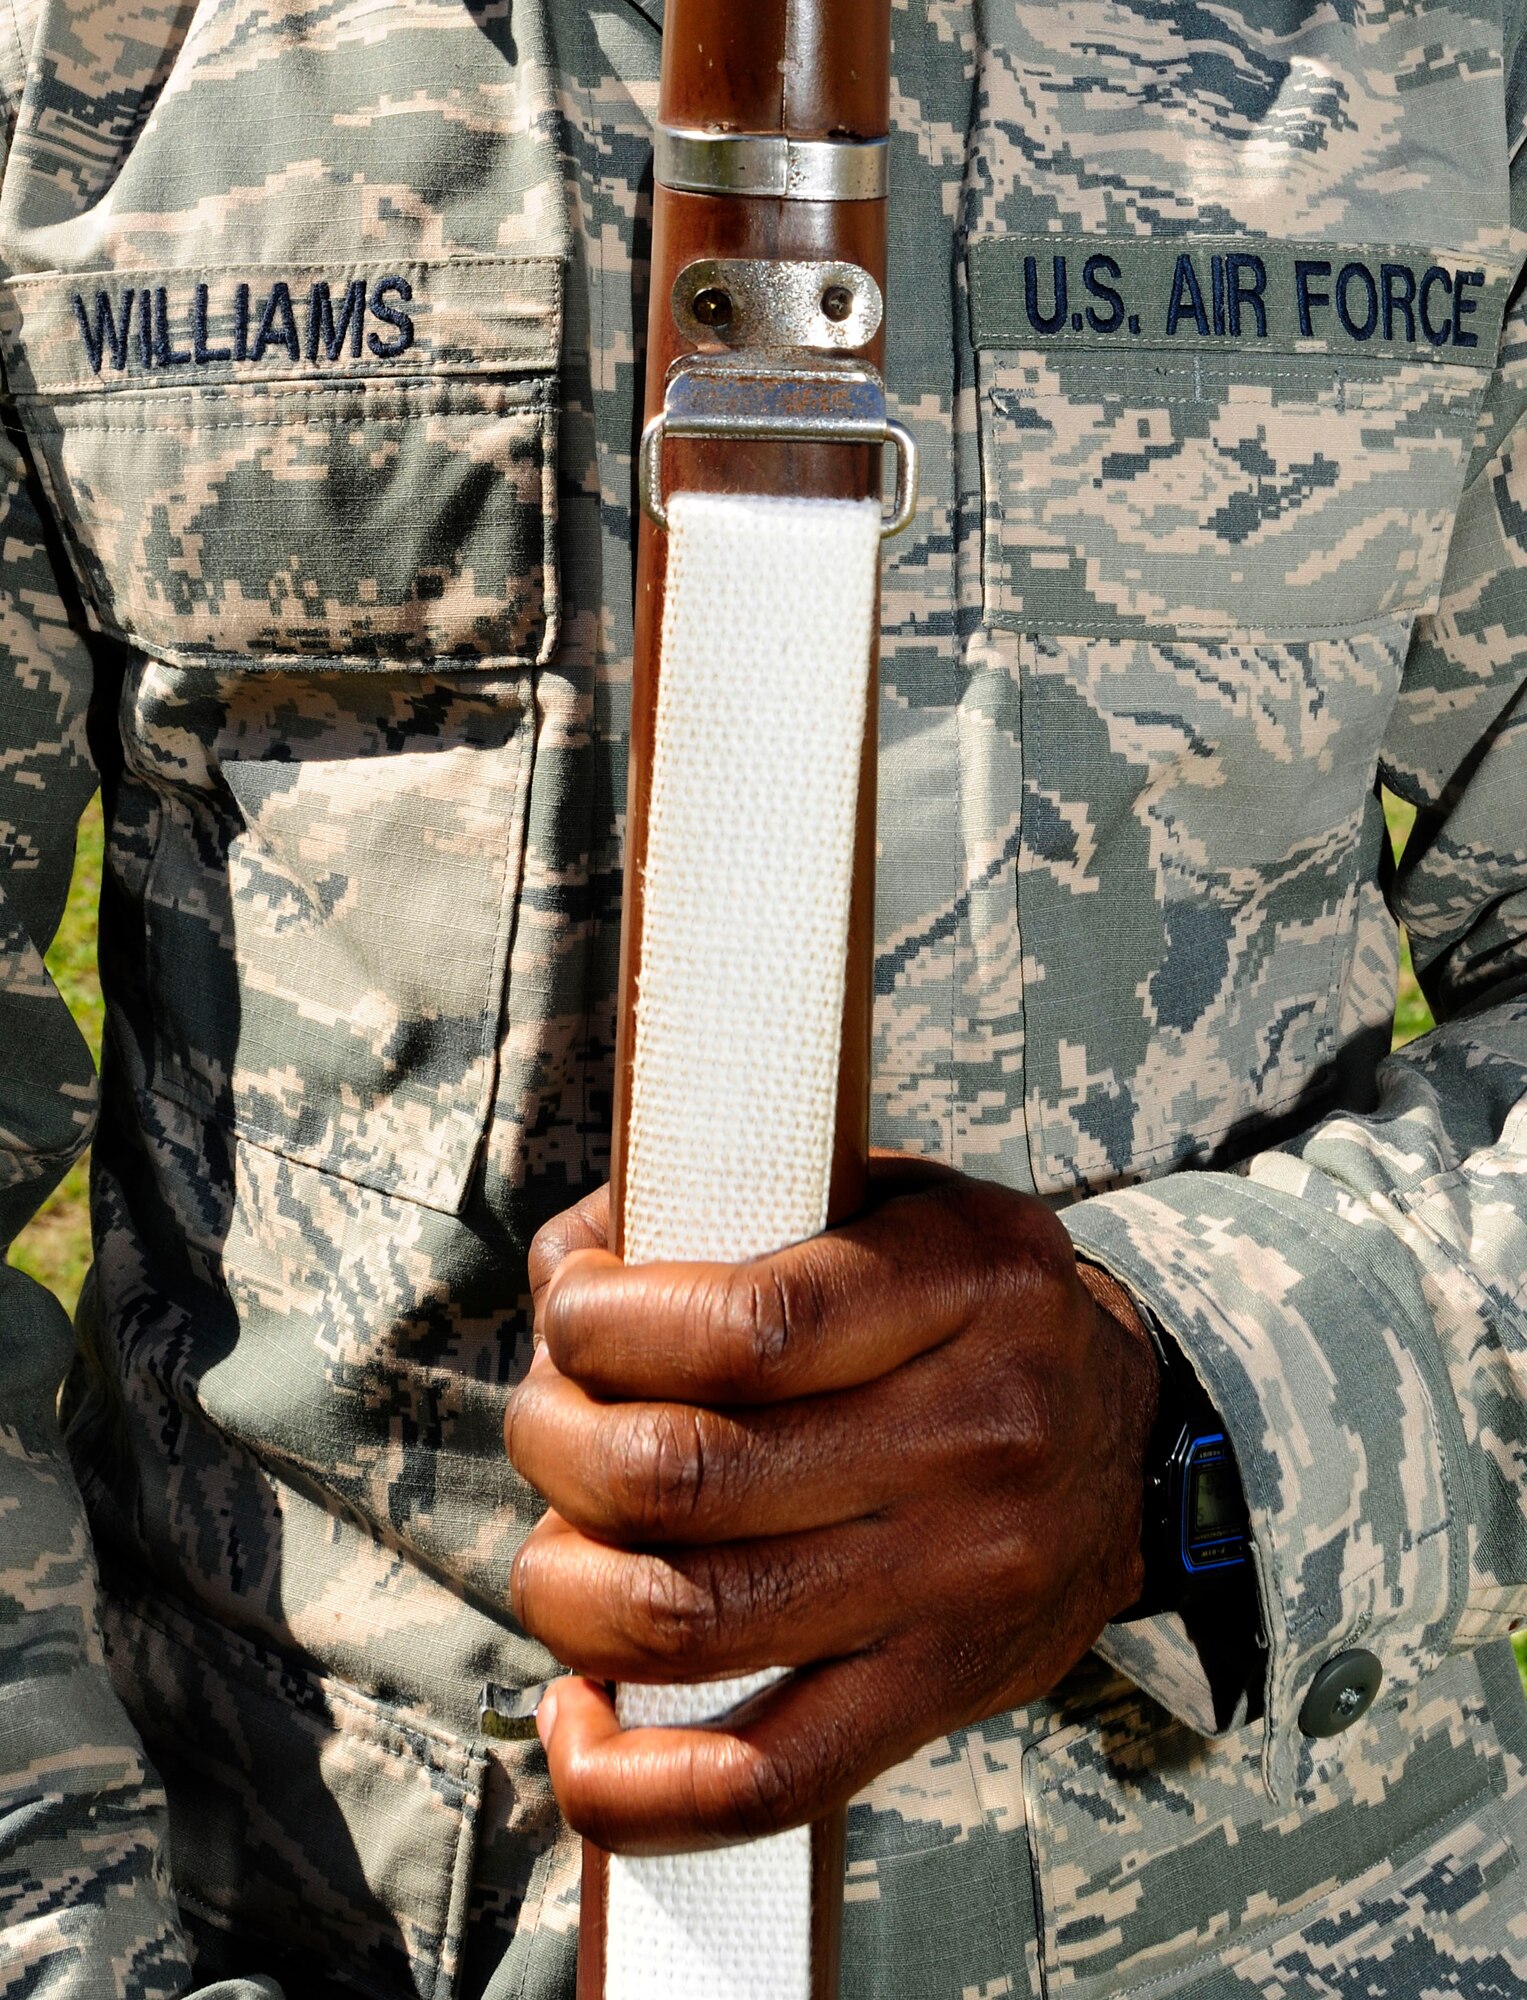 Senior Airman Darryl Williams, 39th Logistics Readiness Squadron central storage journeyman, holds a ceremonial rifle during an honor guard practice March 5, 2015, at Incirlik Air Base, Turkey. Williams practices multiple drill movements during honor guard team practices. (U.S. Air Force photo by Senior Airman Krystal Ardrey/Released)